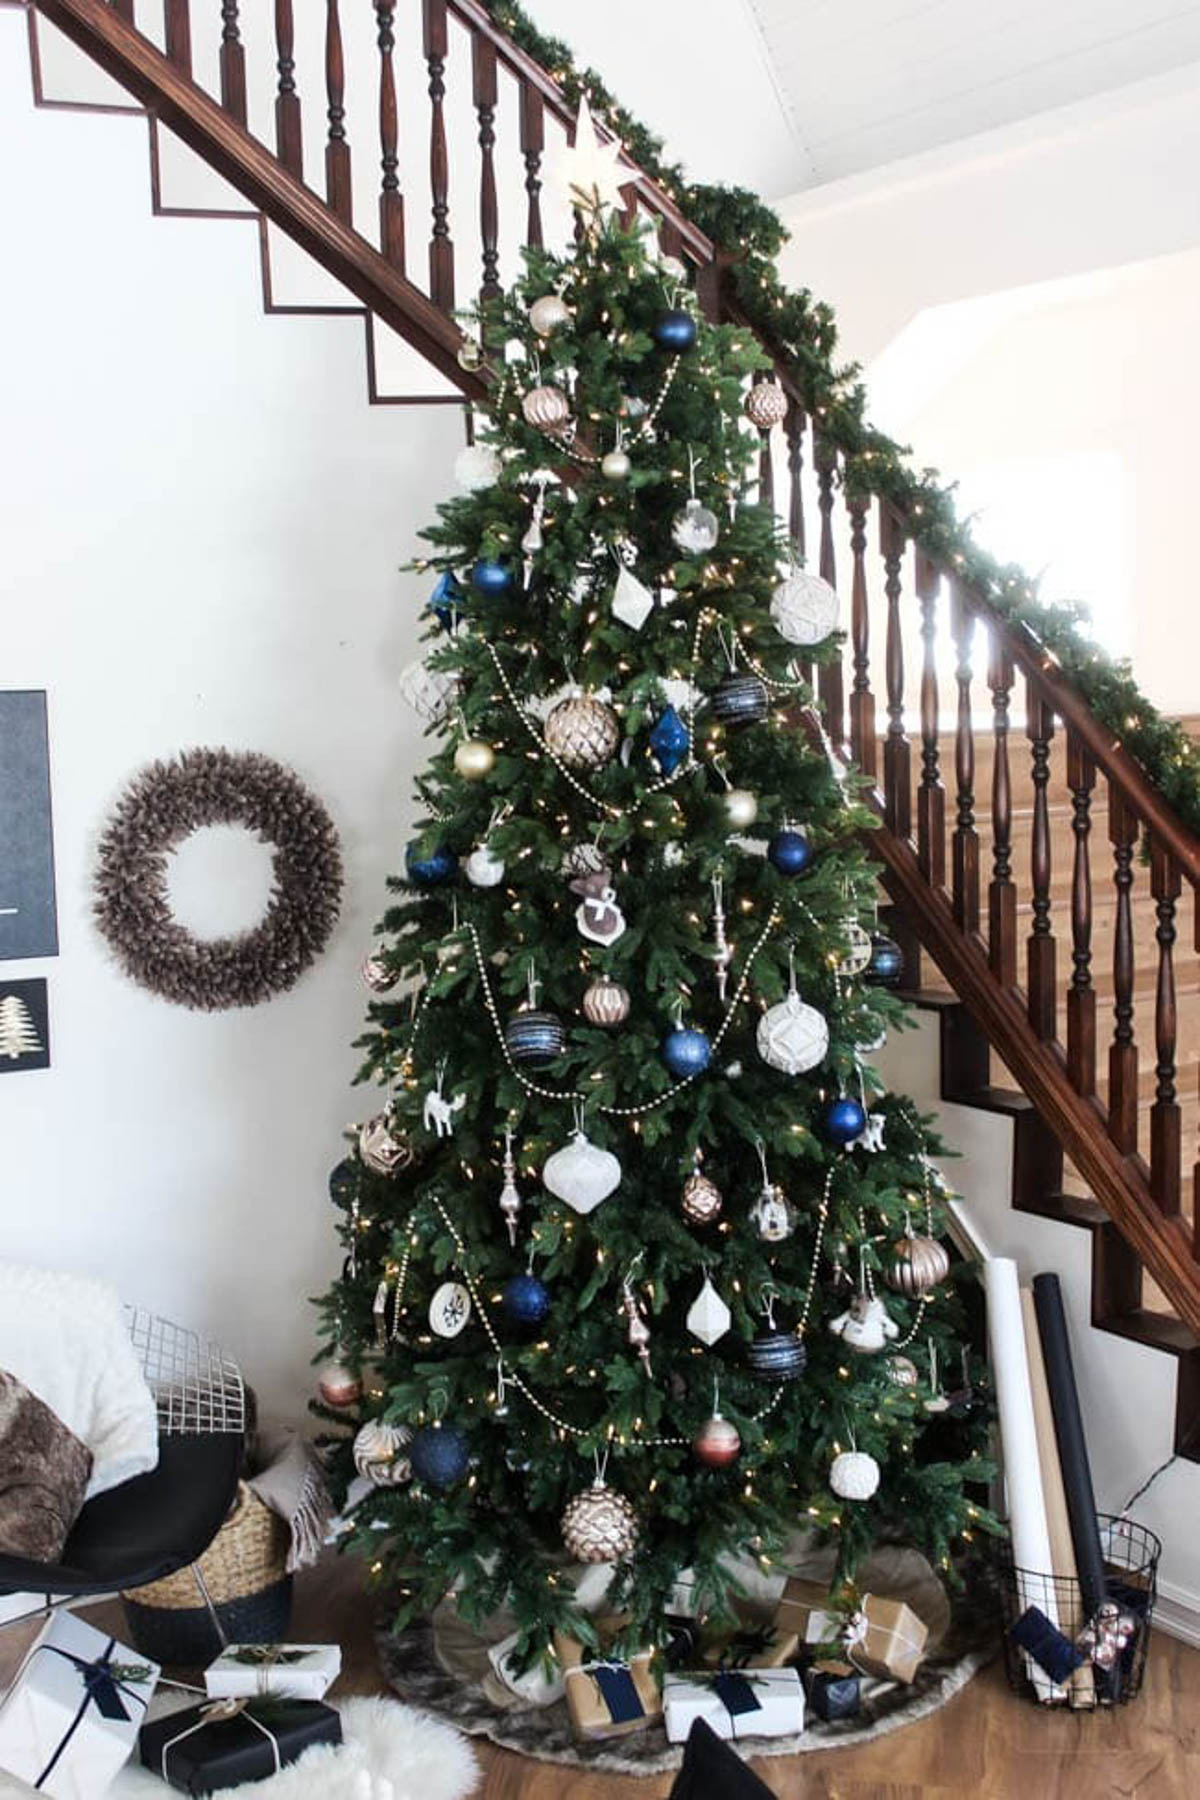 Decorated designer Christmas tree by a stairway.